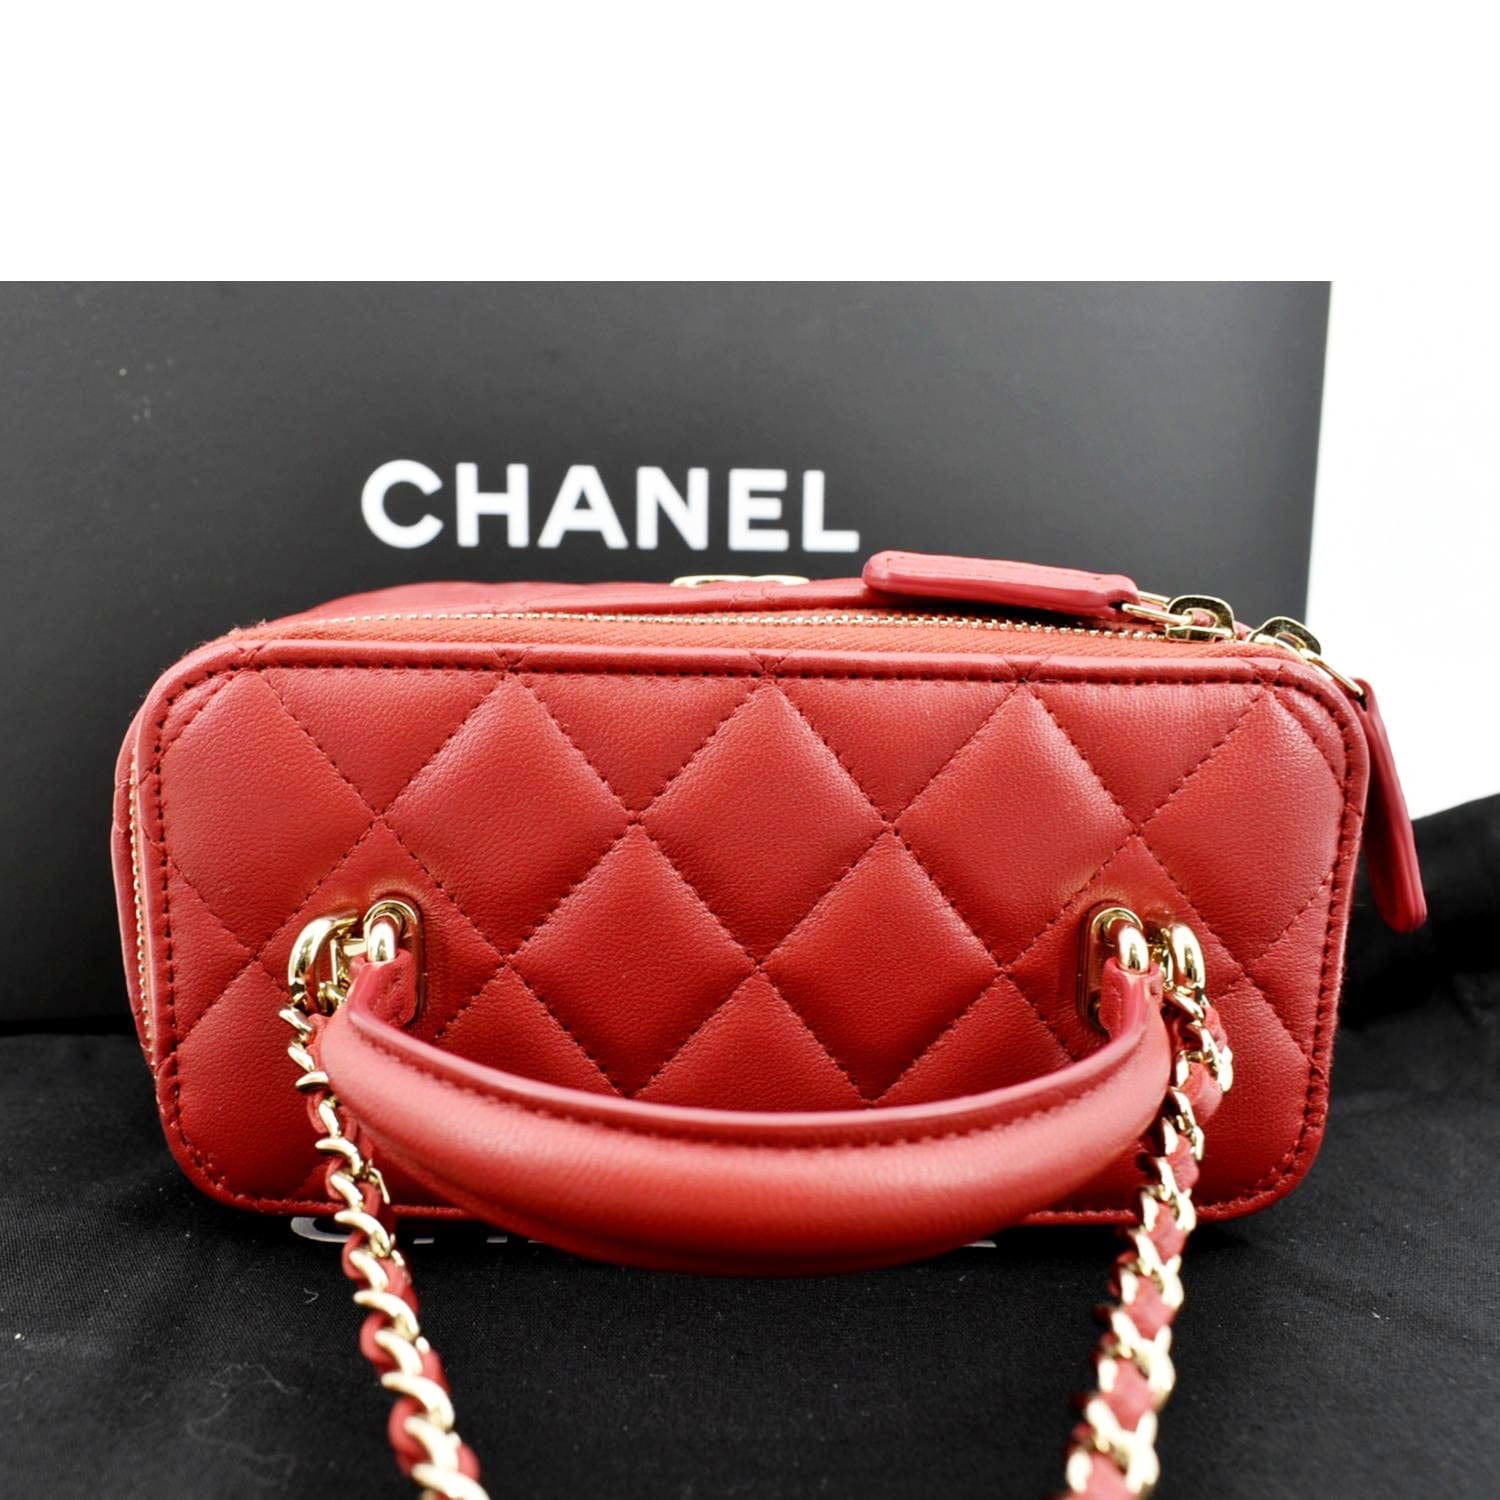 Red Chanel Camera Bag Crossbody Great Condition